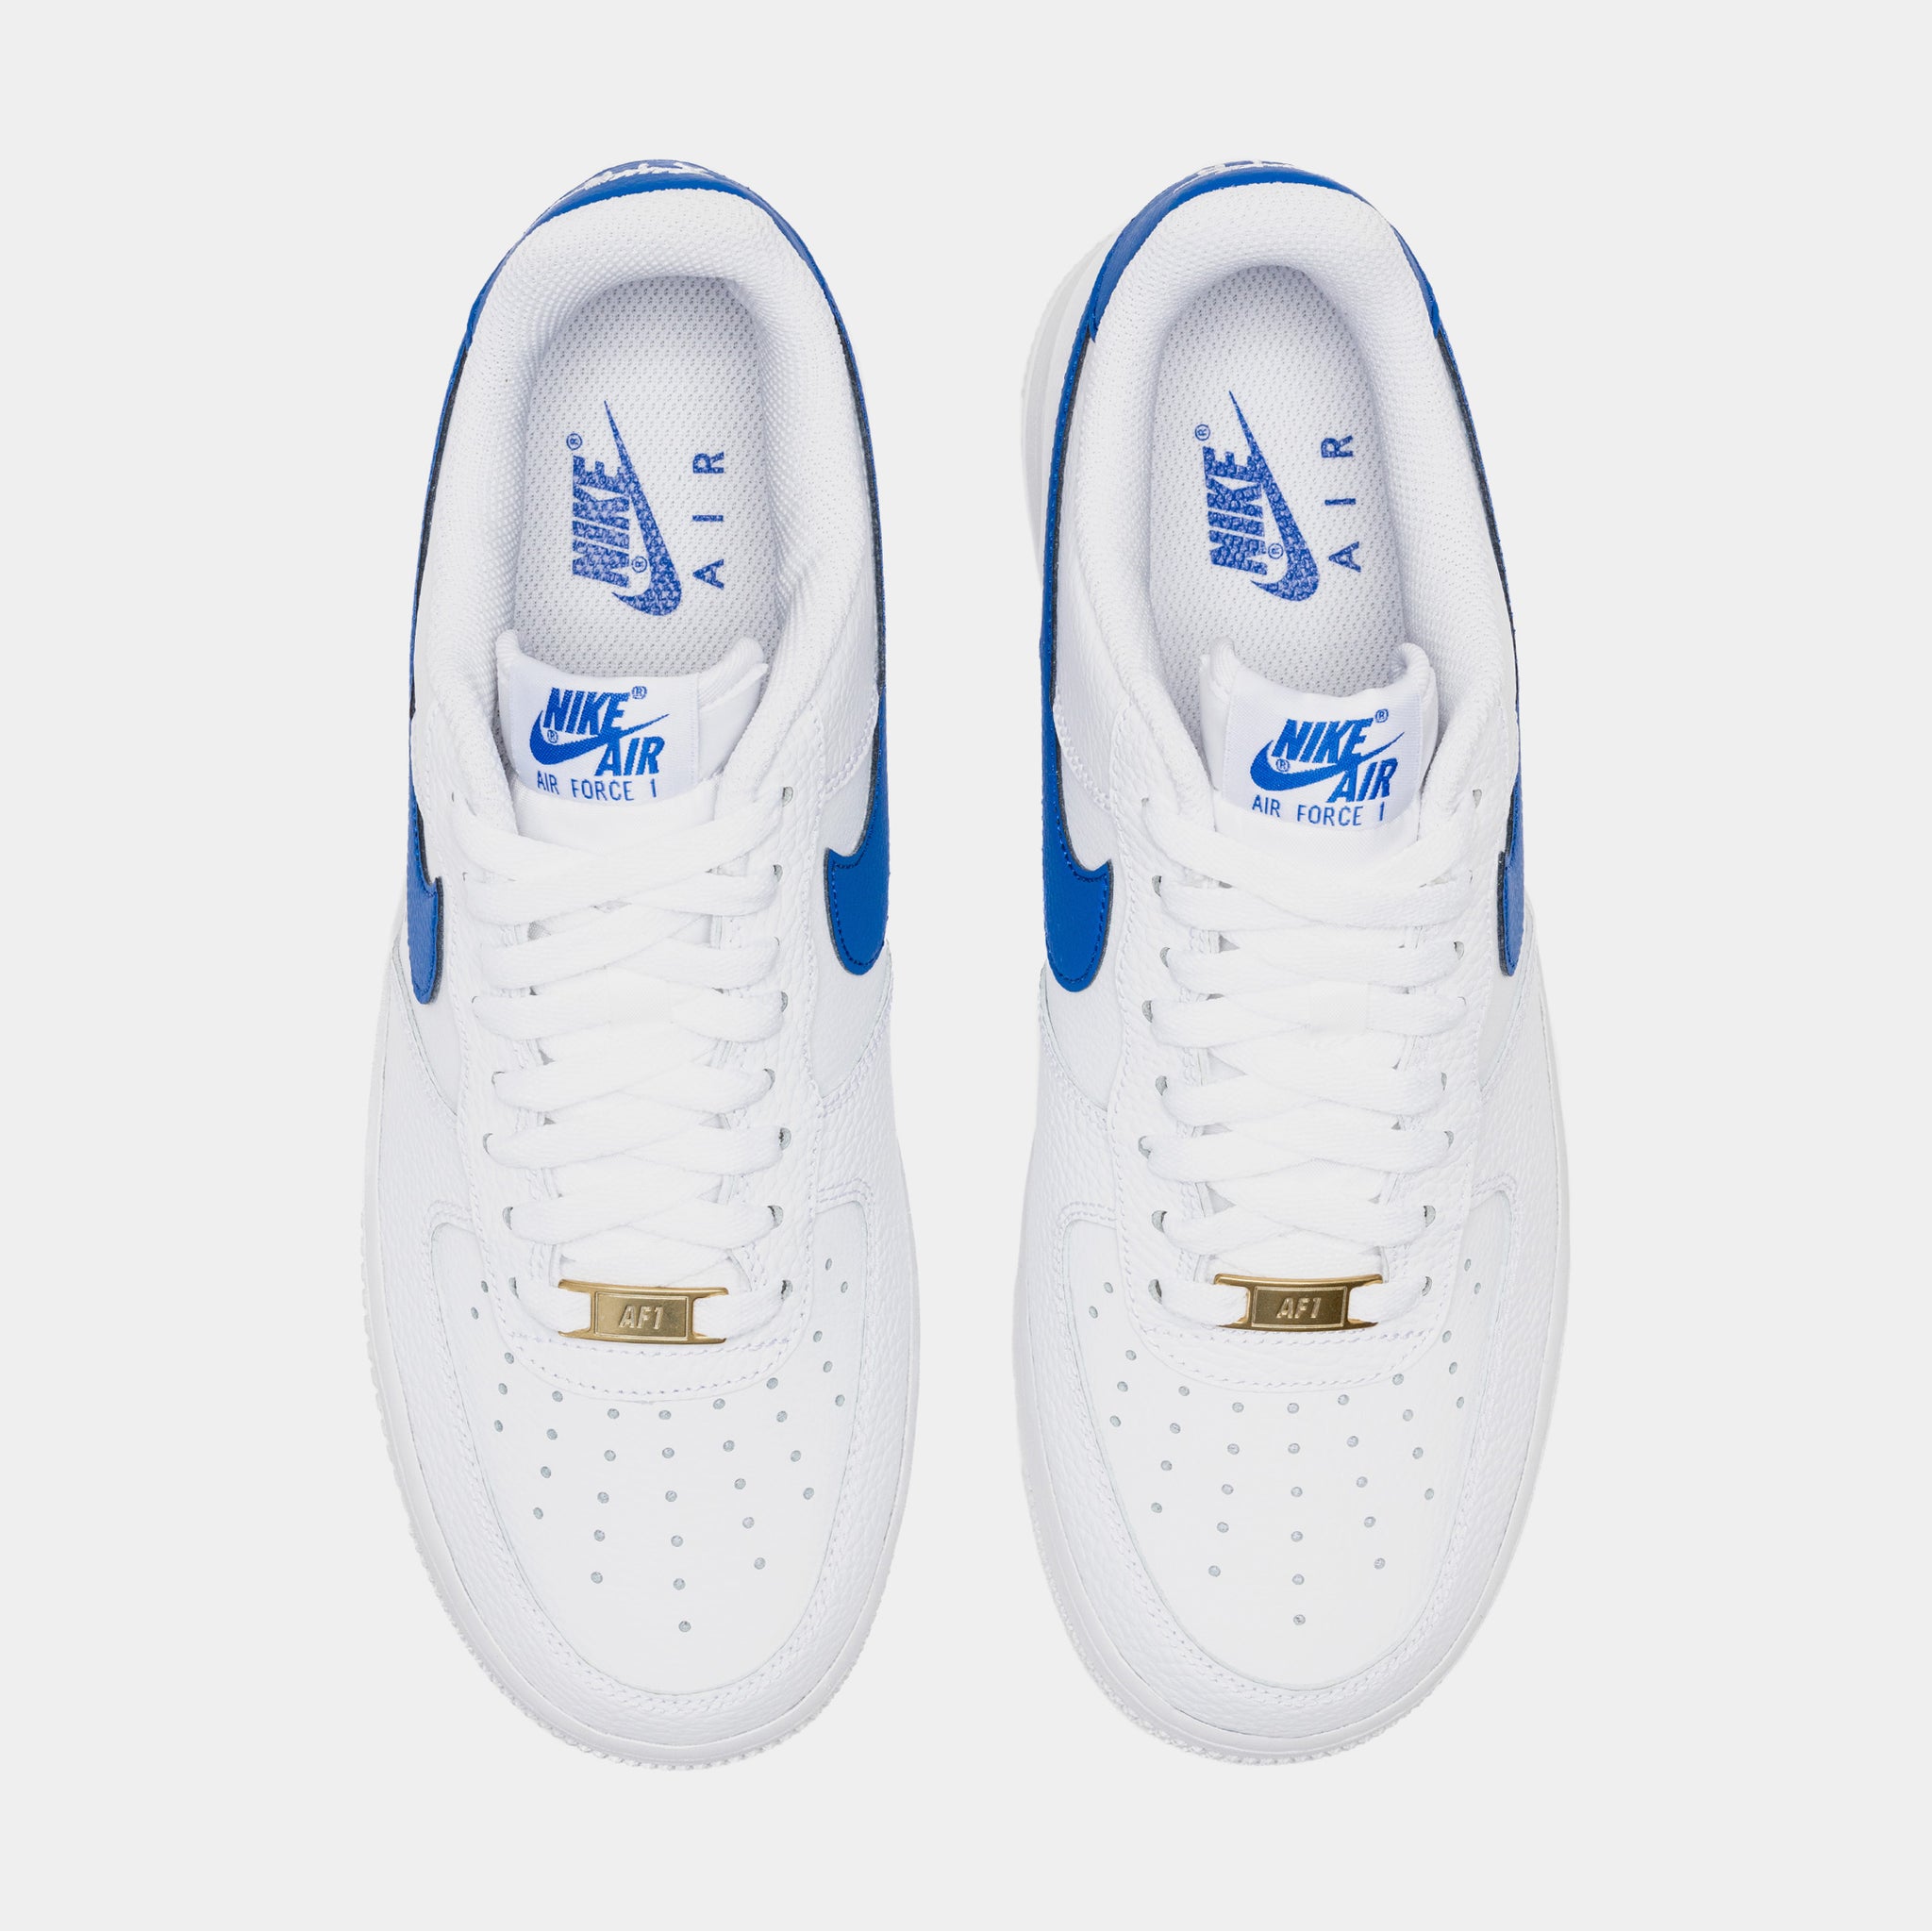 Air Force 1 Low Mens Lifestyle Shoes (White/Blue)